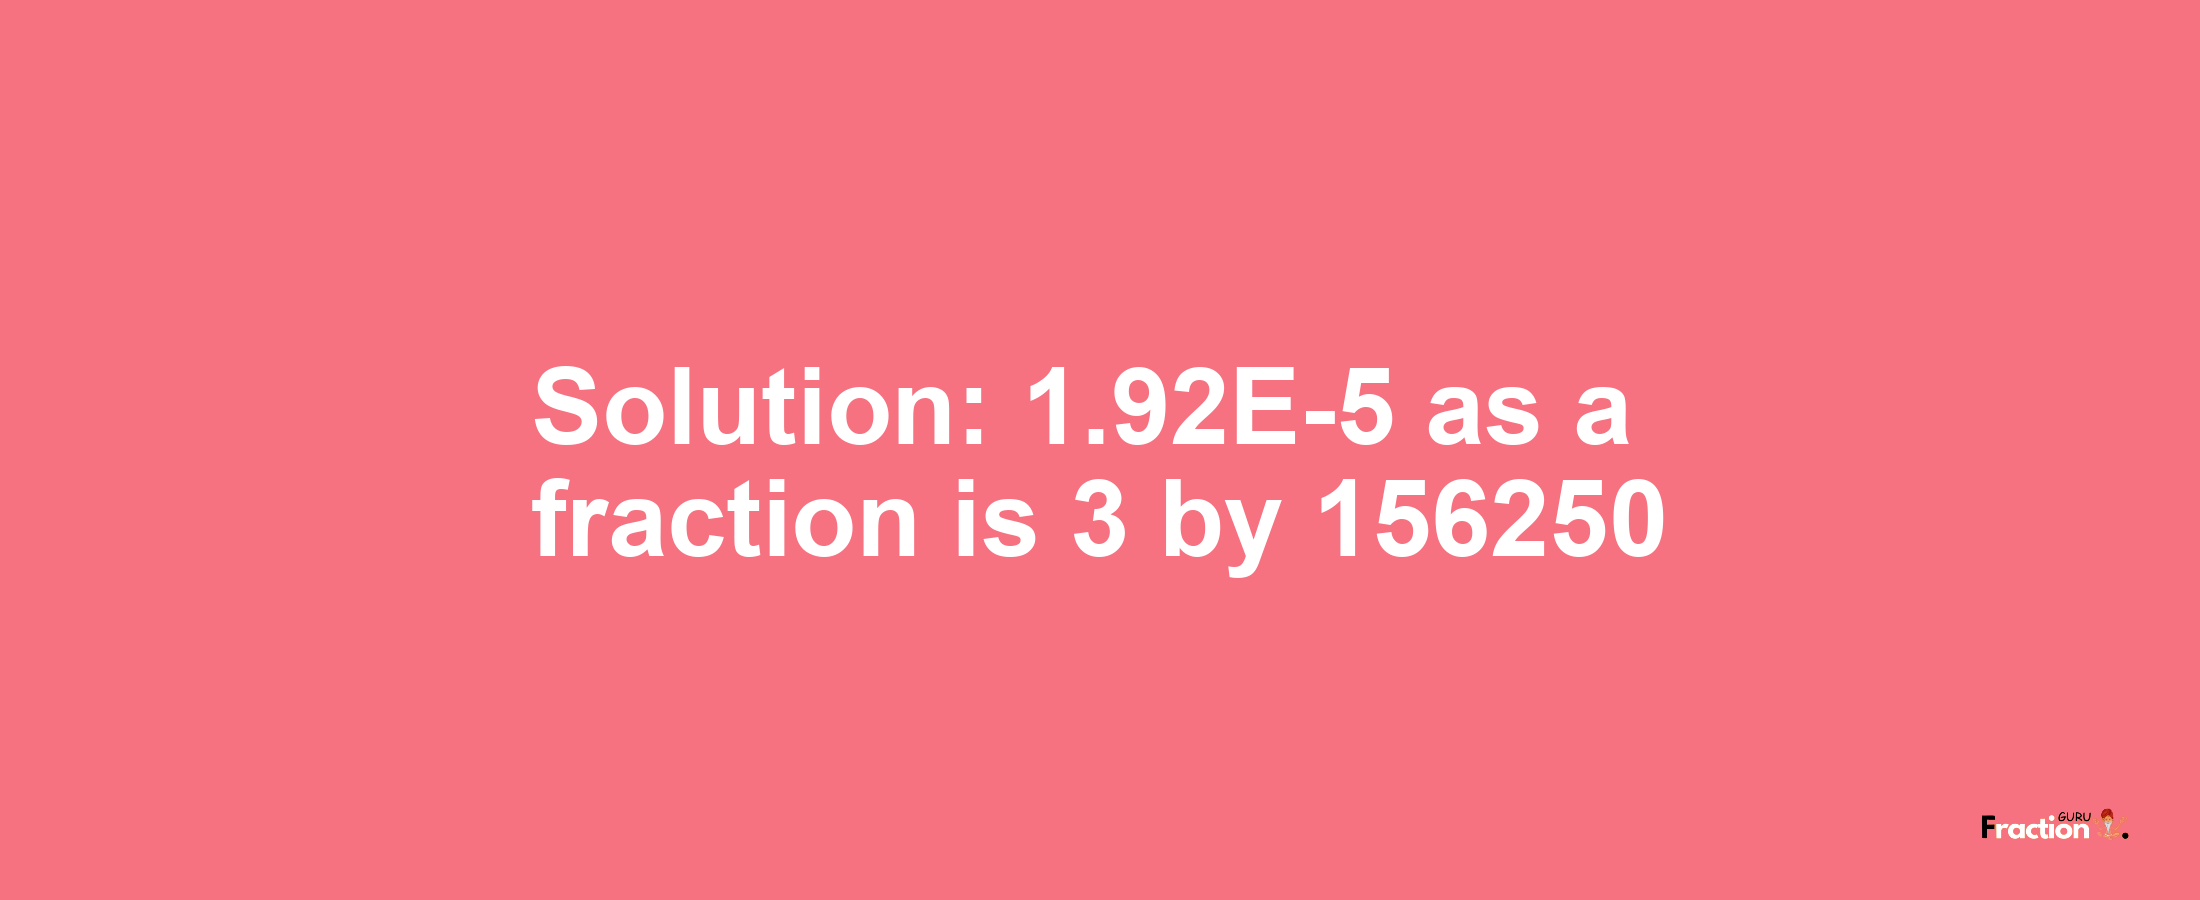 Solution:1.92E-5 as a fraction is 3/156250